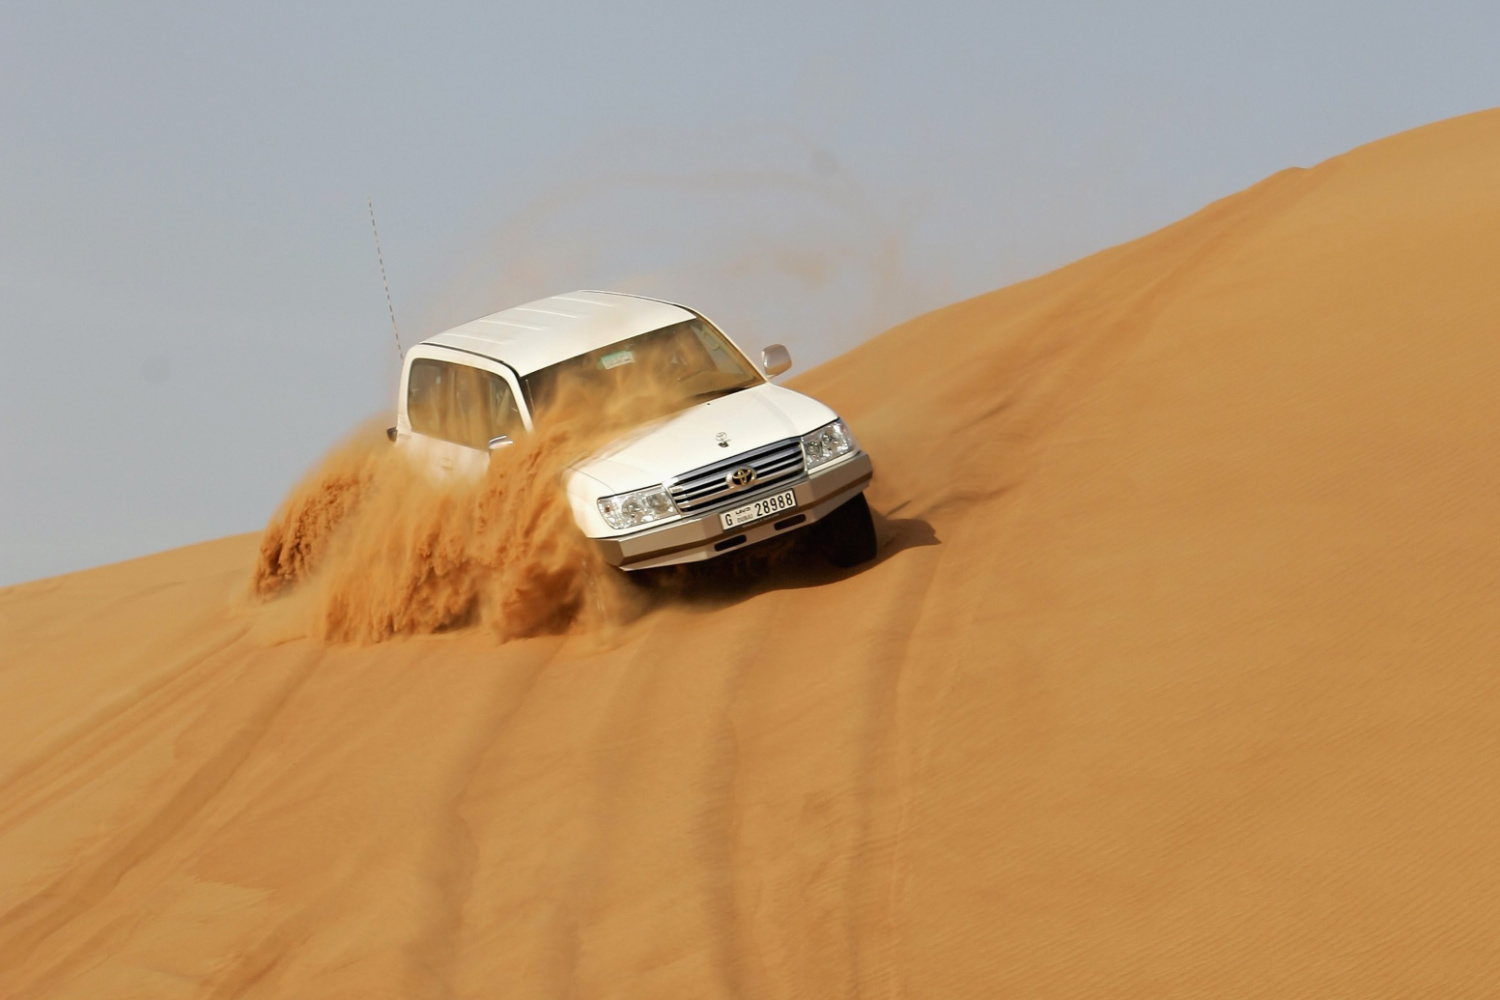 Go off-road adventuring in Abu Dhabi in your own vehicle | Adventure ...